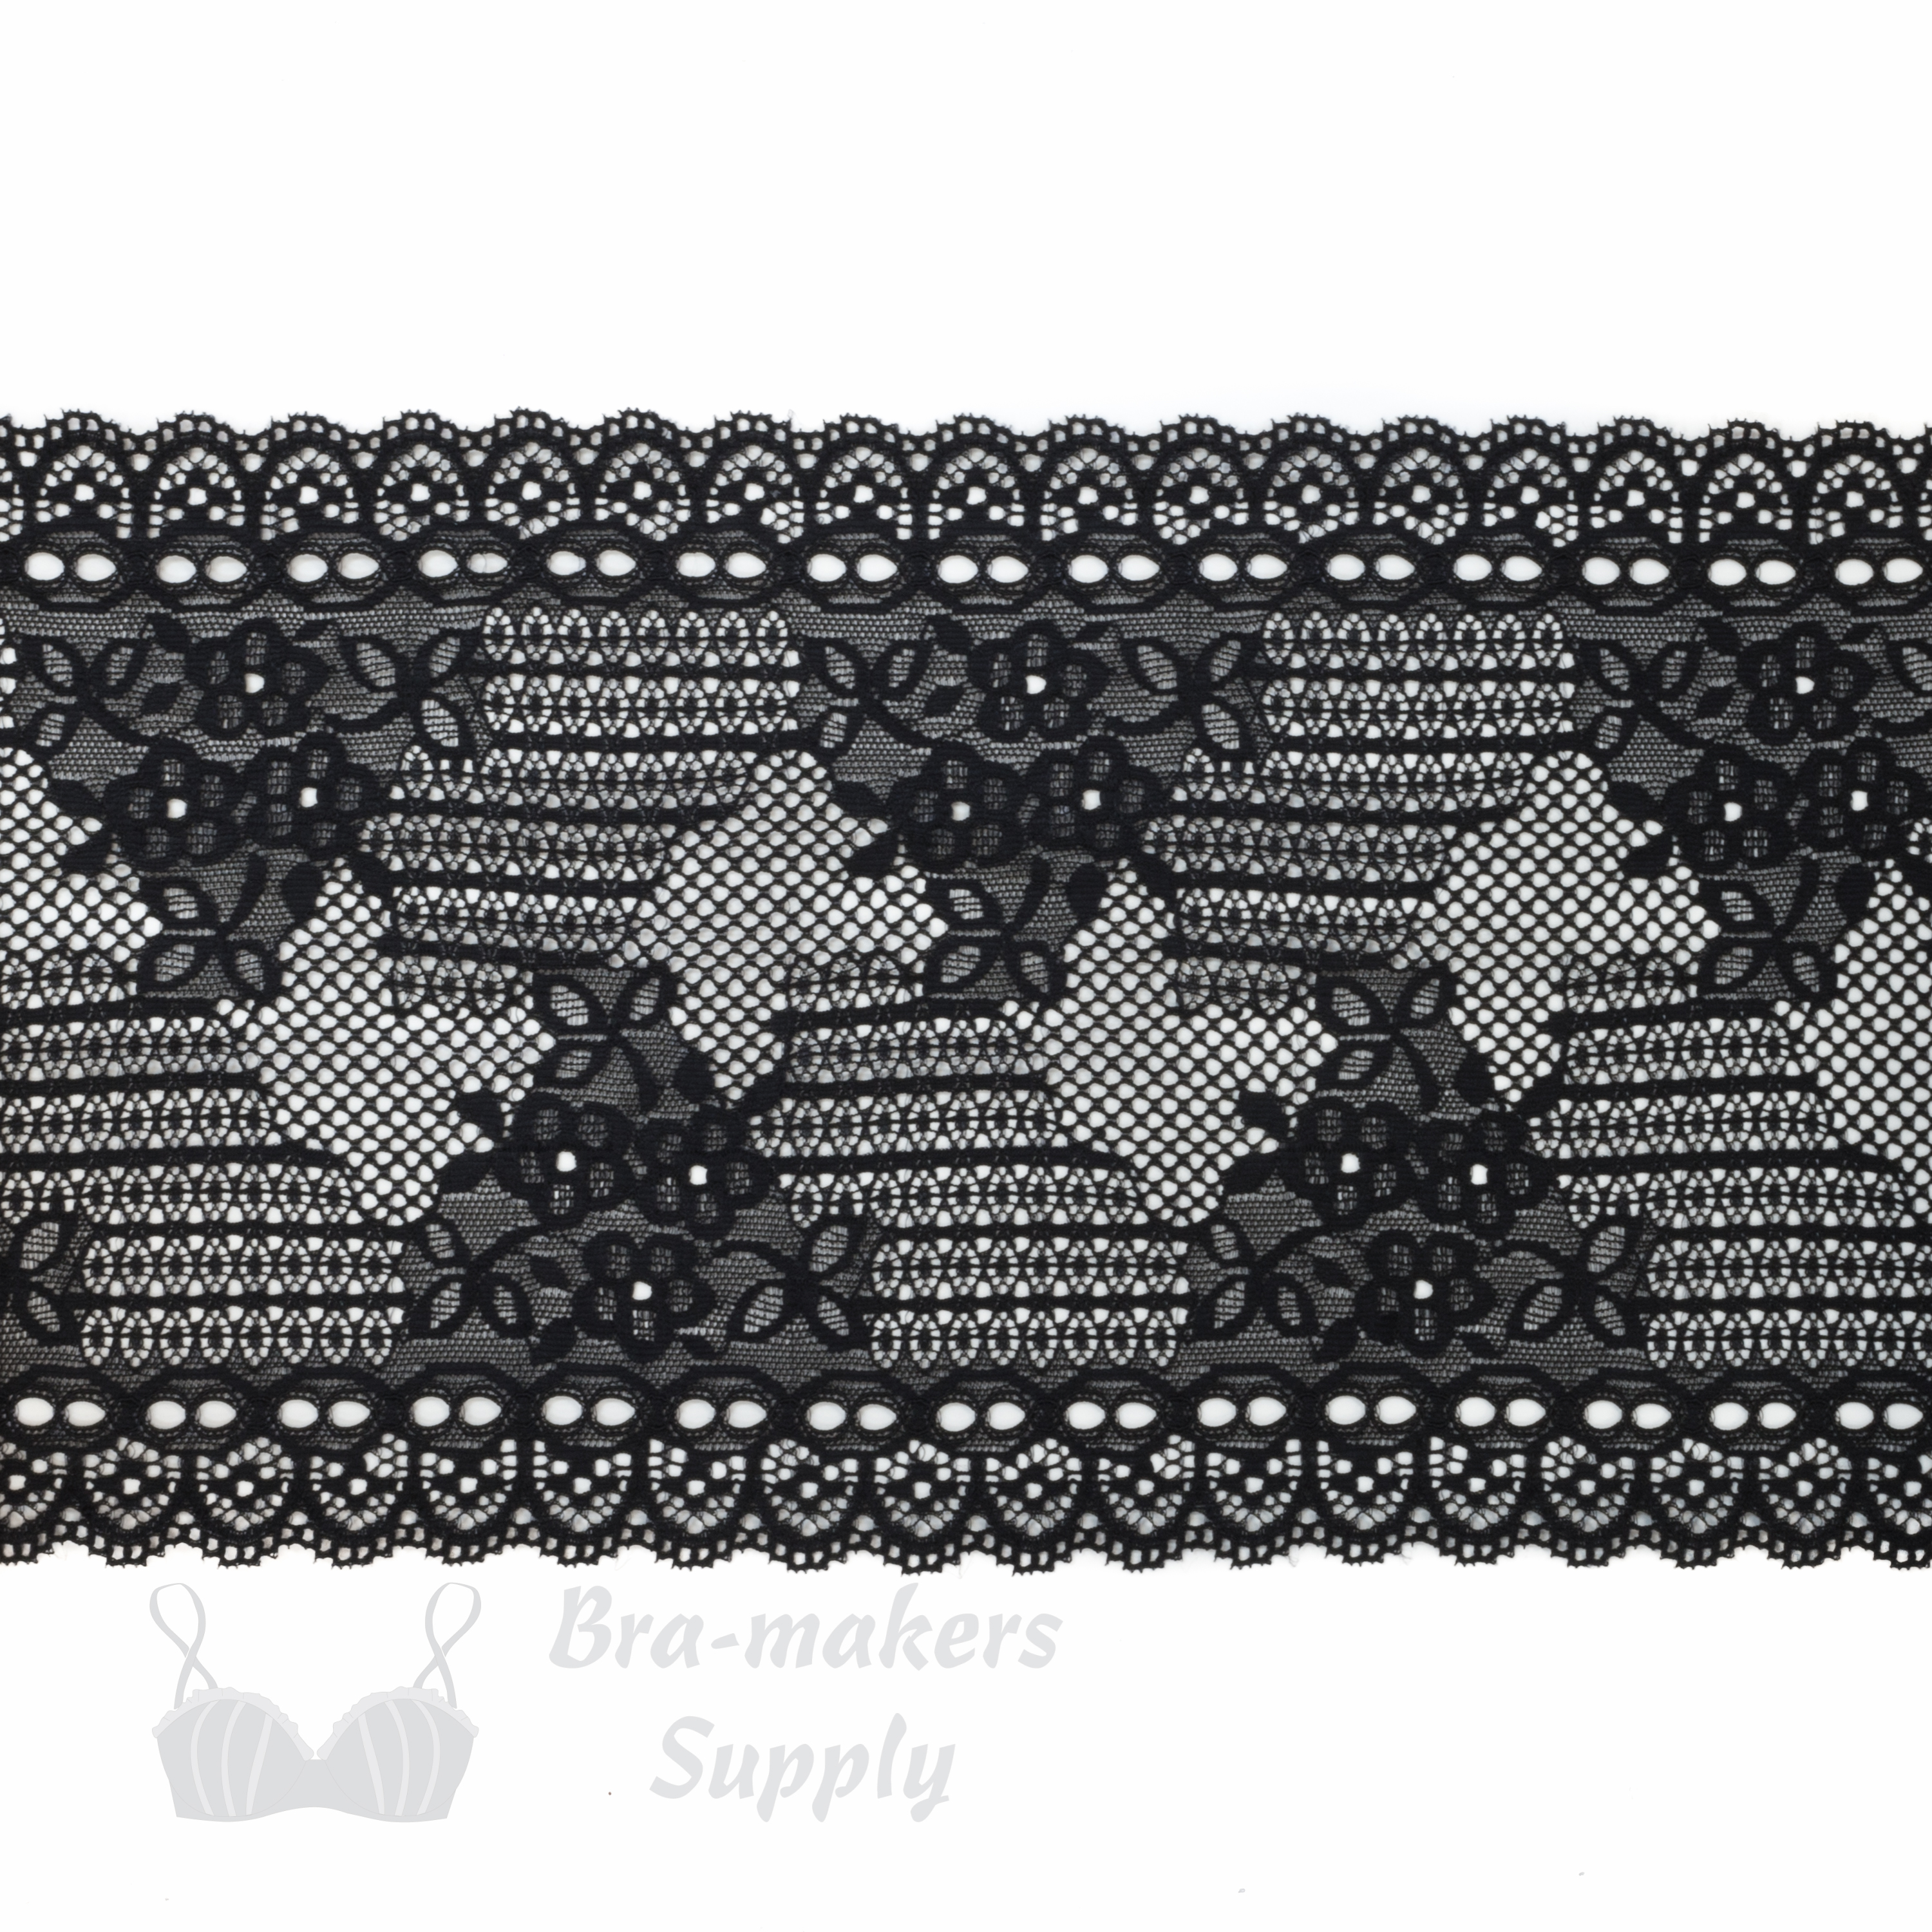 https://www.braandcorsetsupplies.com/wp-content/uploads/2016/08/stretch-laces-6-inch-15-cm-six-inch-black-floral-geometric-stretch-lace-LS-60-981-from-Bra-Makers-Supply.jpg